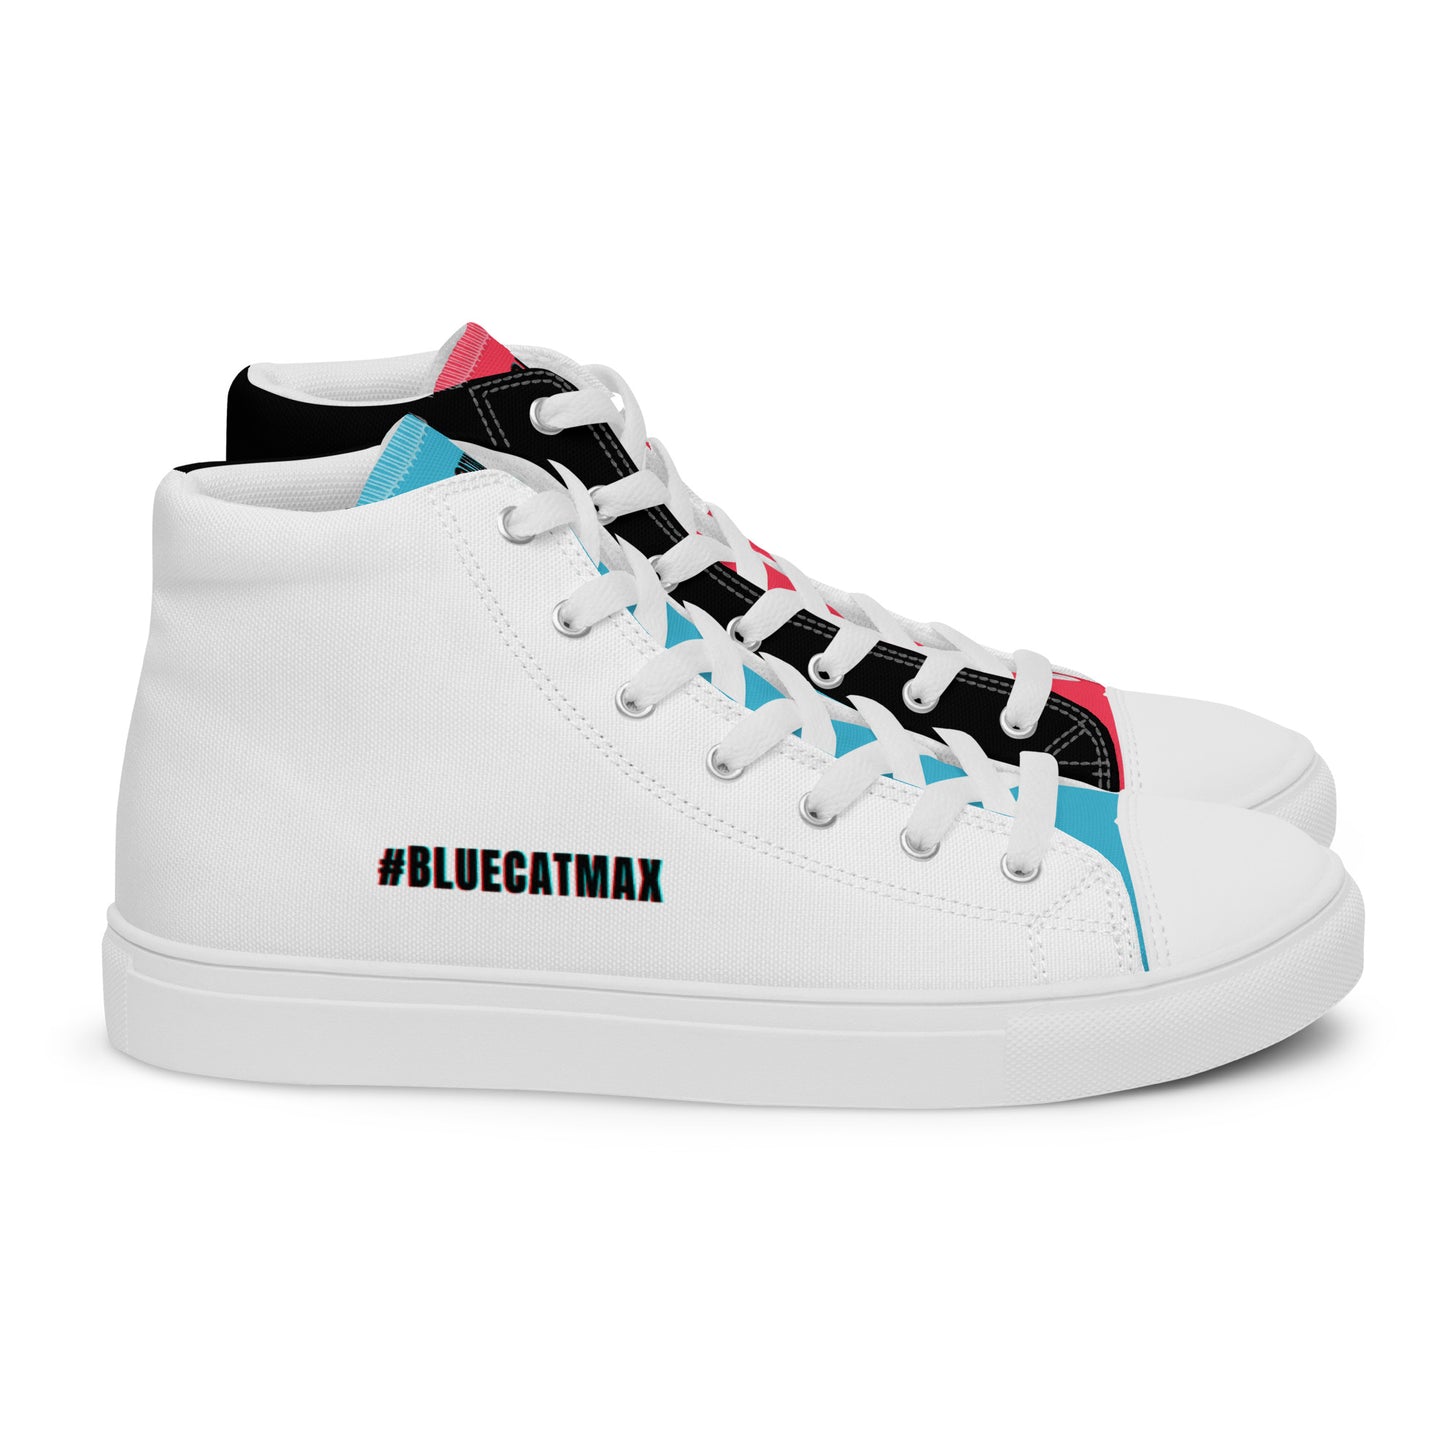 #bluecatmax Women’s High Top Canvas Shoes Comfortable Breathable 5-12.5